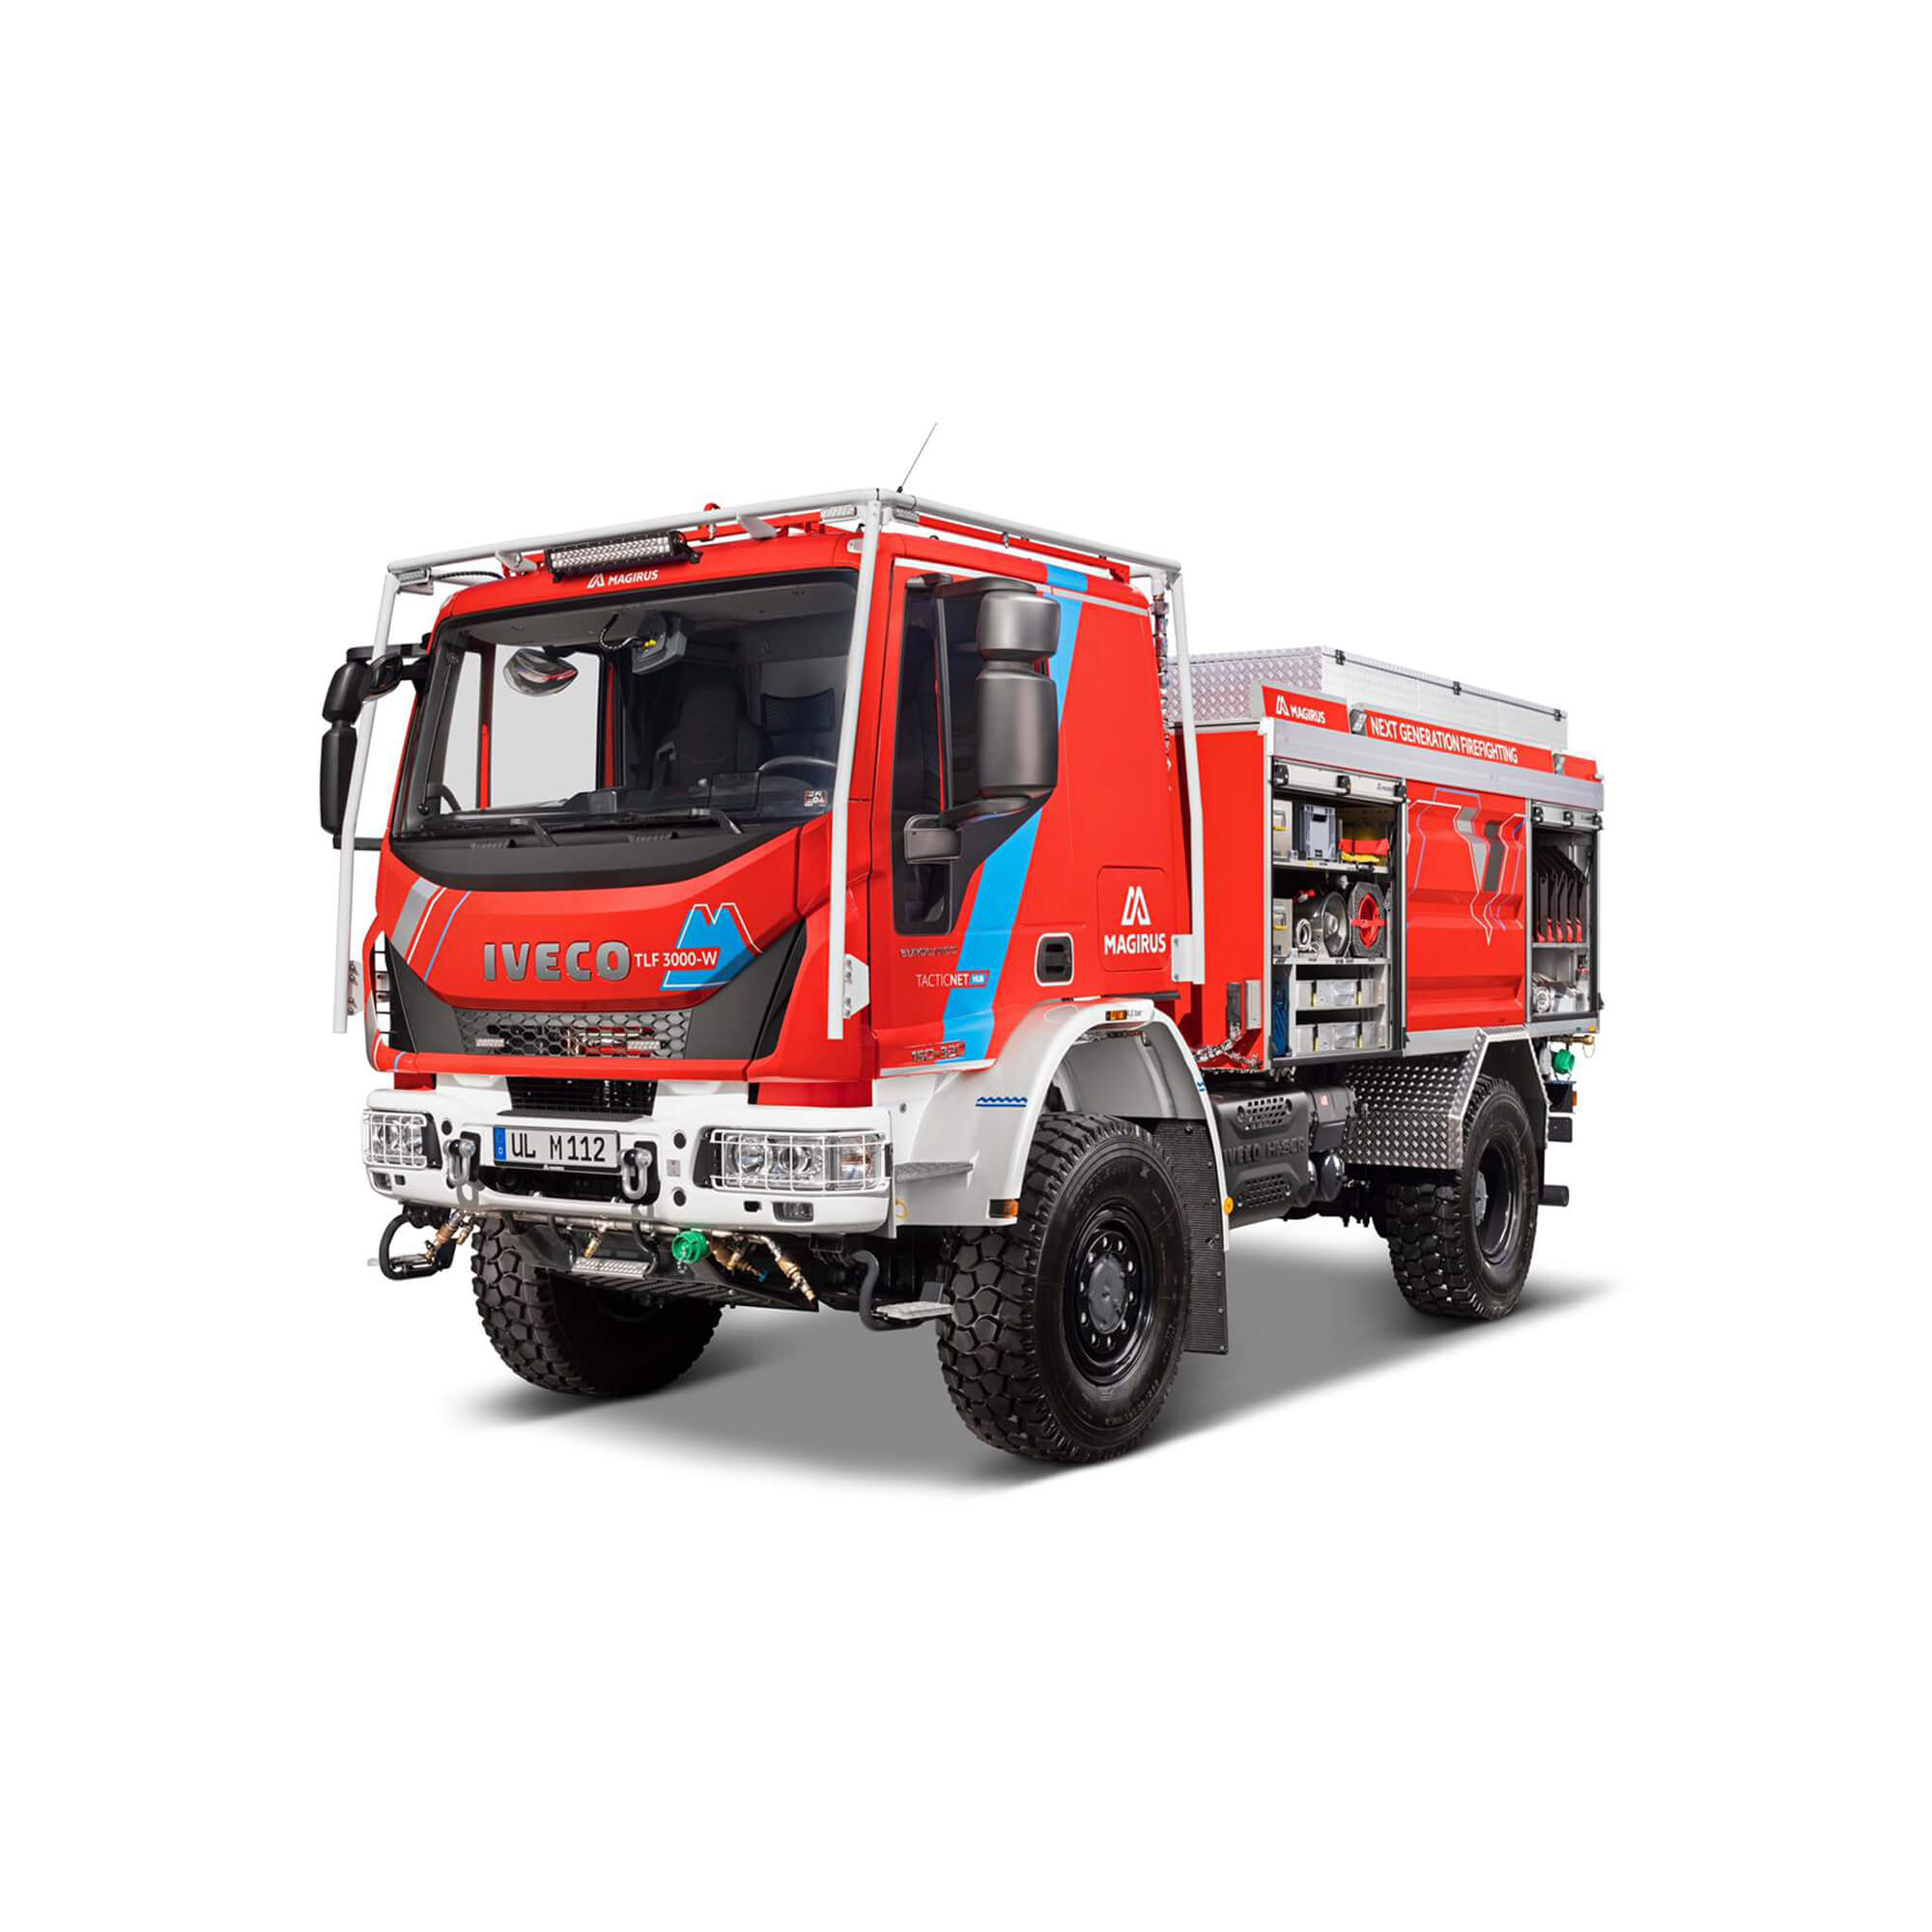 Forest firefighting vehicle Magirus TLF 3000-W